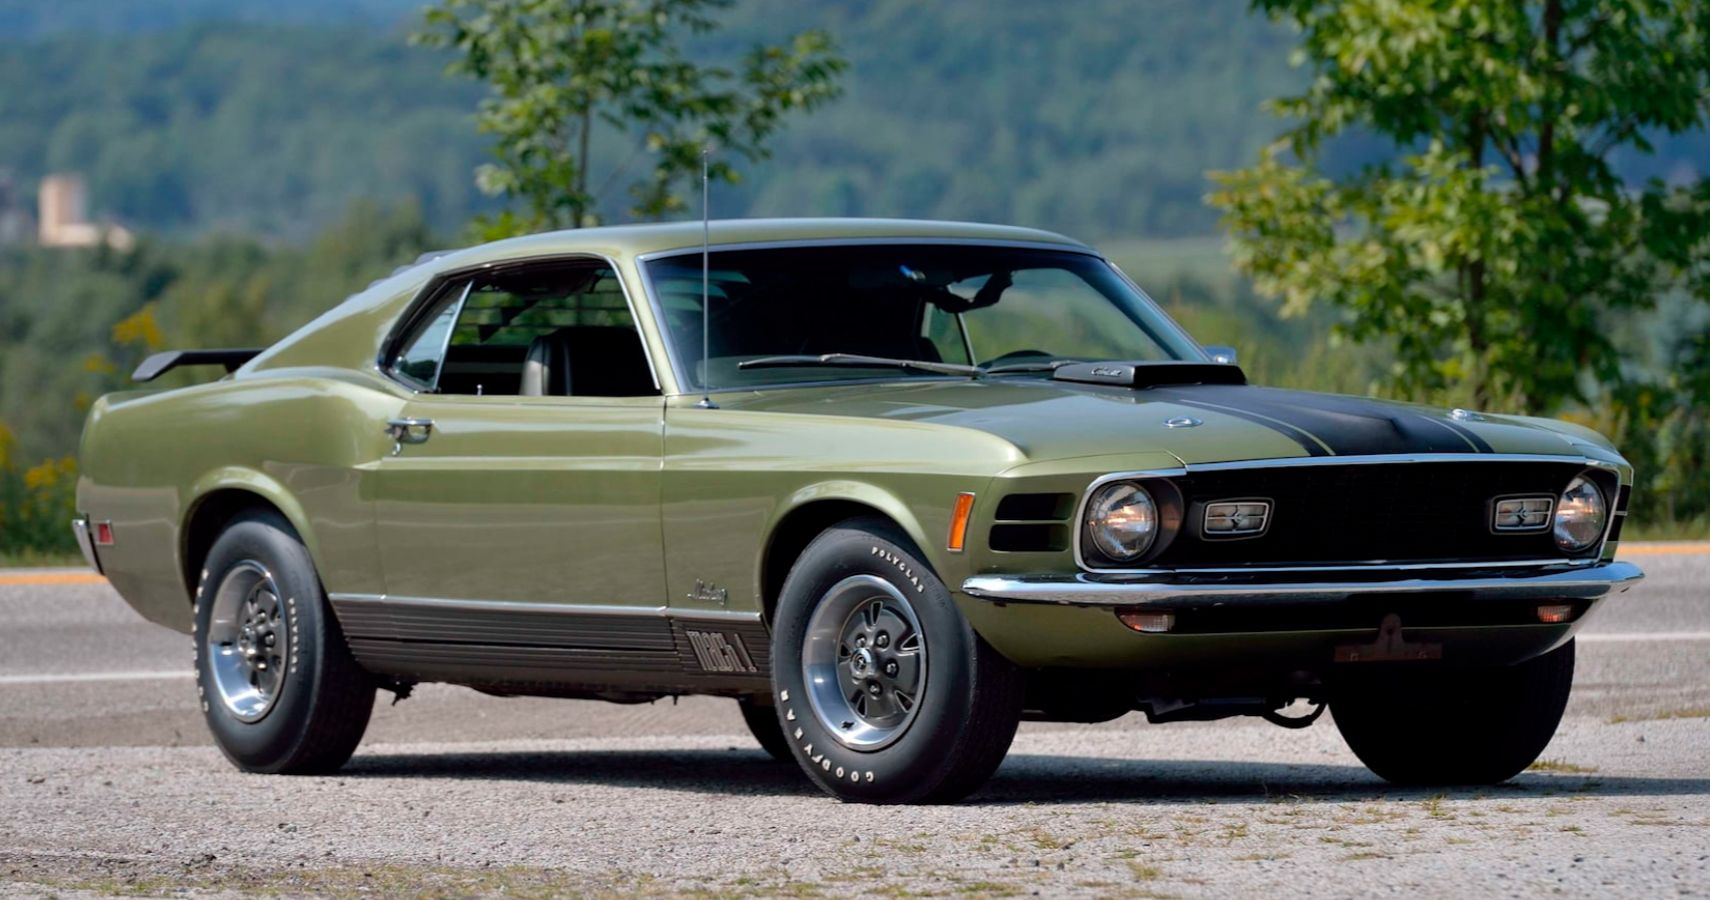 Unrestored 1970 Ford Mustang Mach 1 With Cobra Jet Drag Pak Heads To Mecum